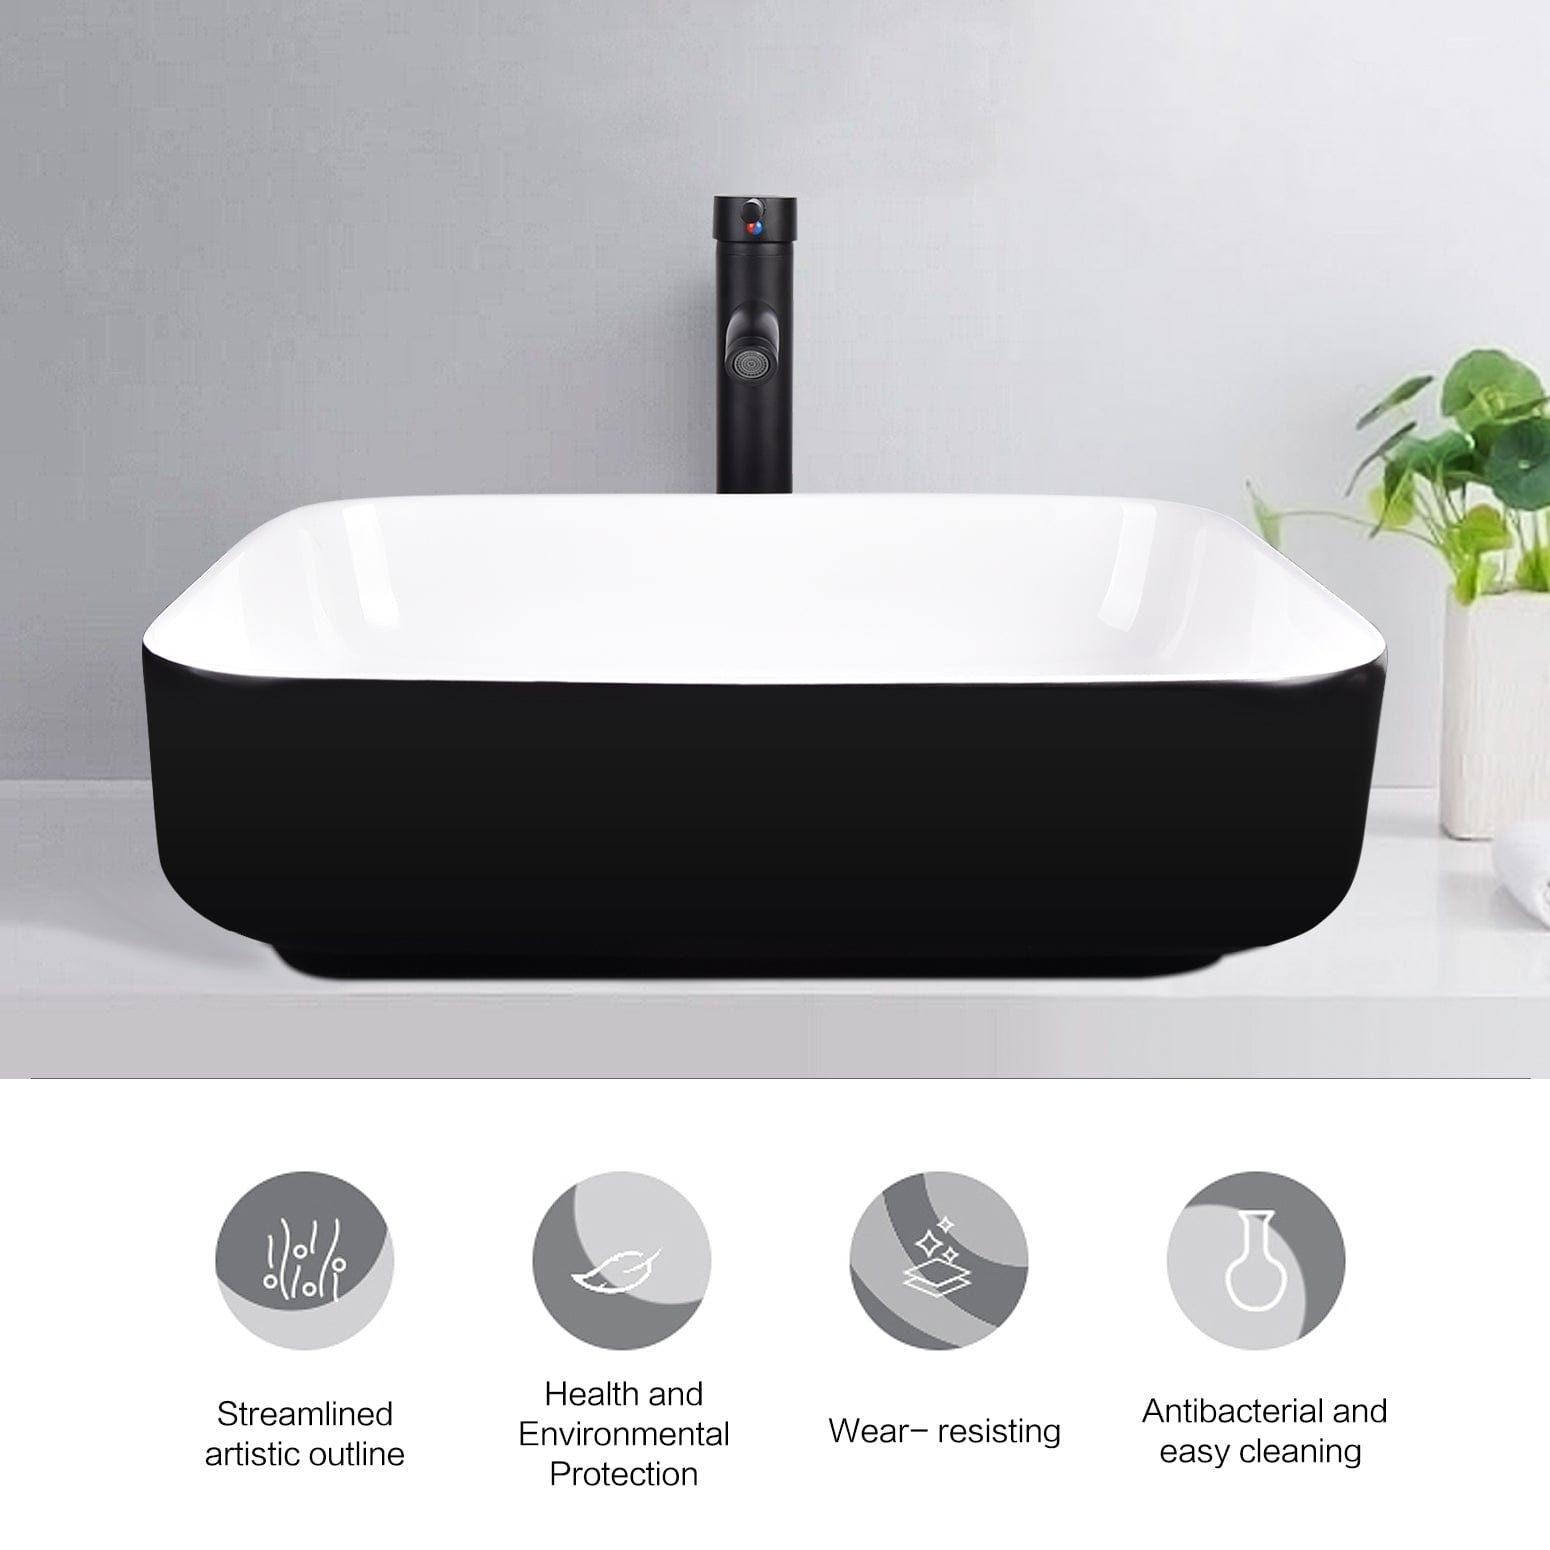 Elecwish Vessel Sinks Black and White Ceramic Bathroom Sink Faucet and Drain Combo has 4 features